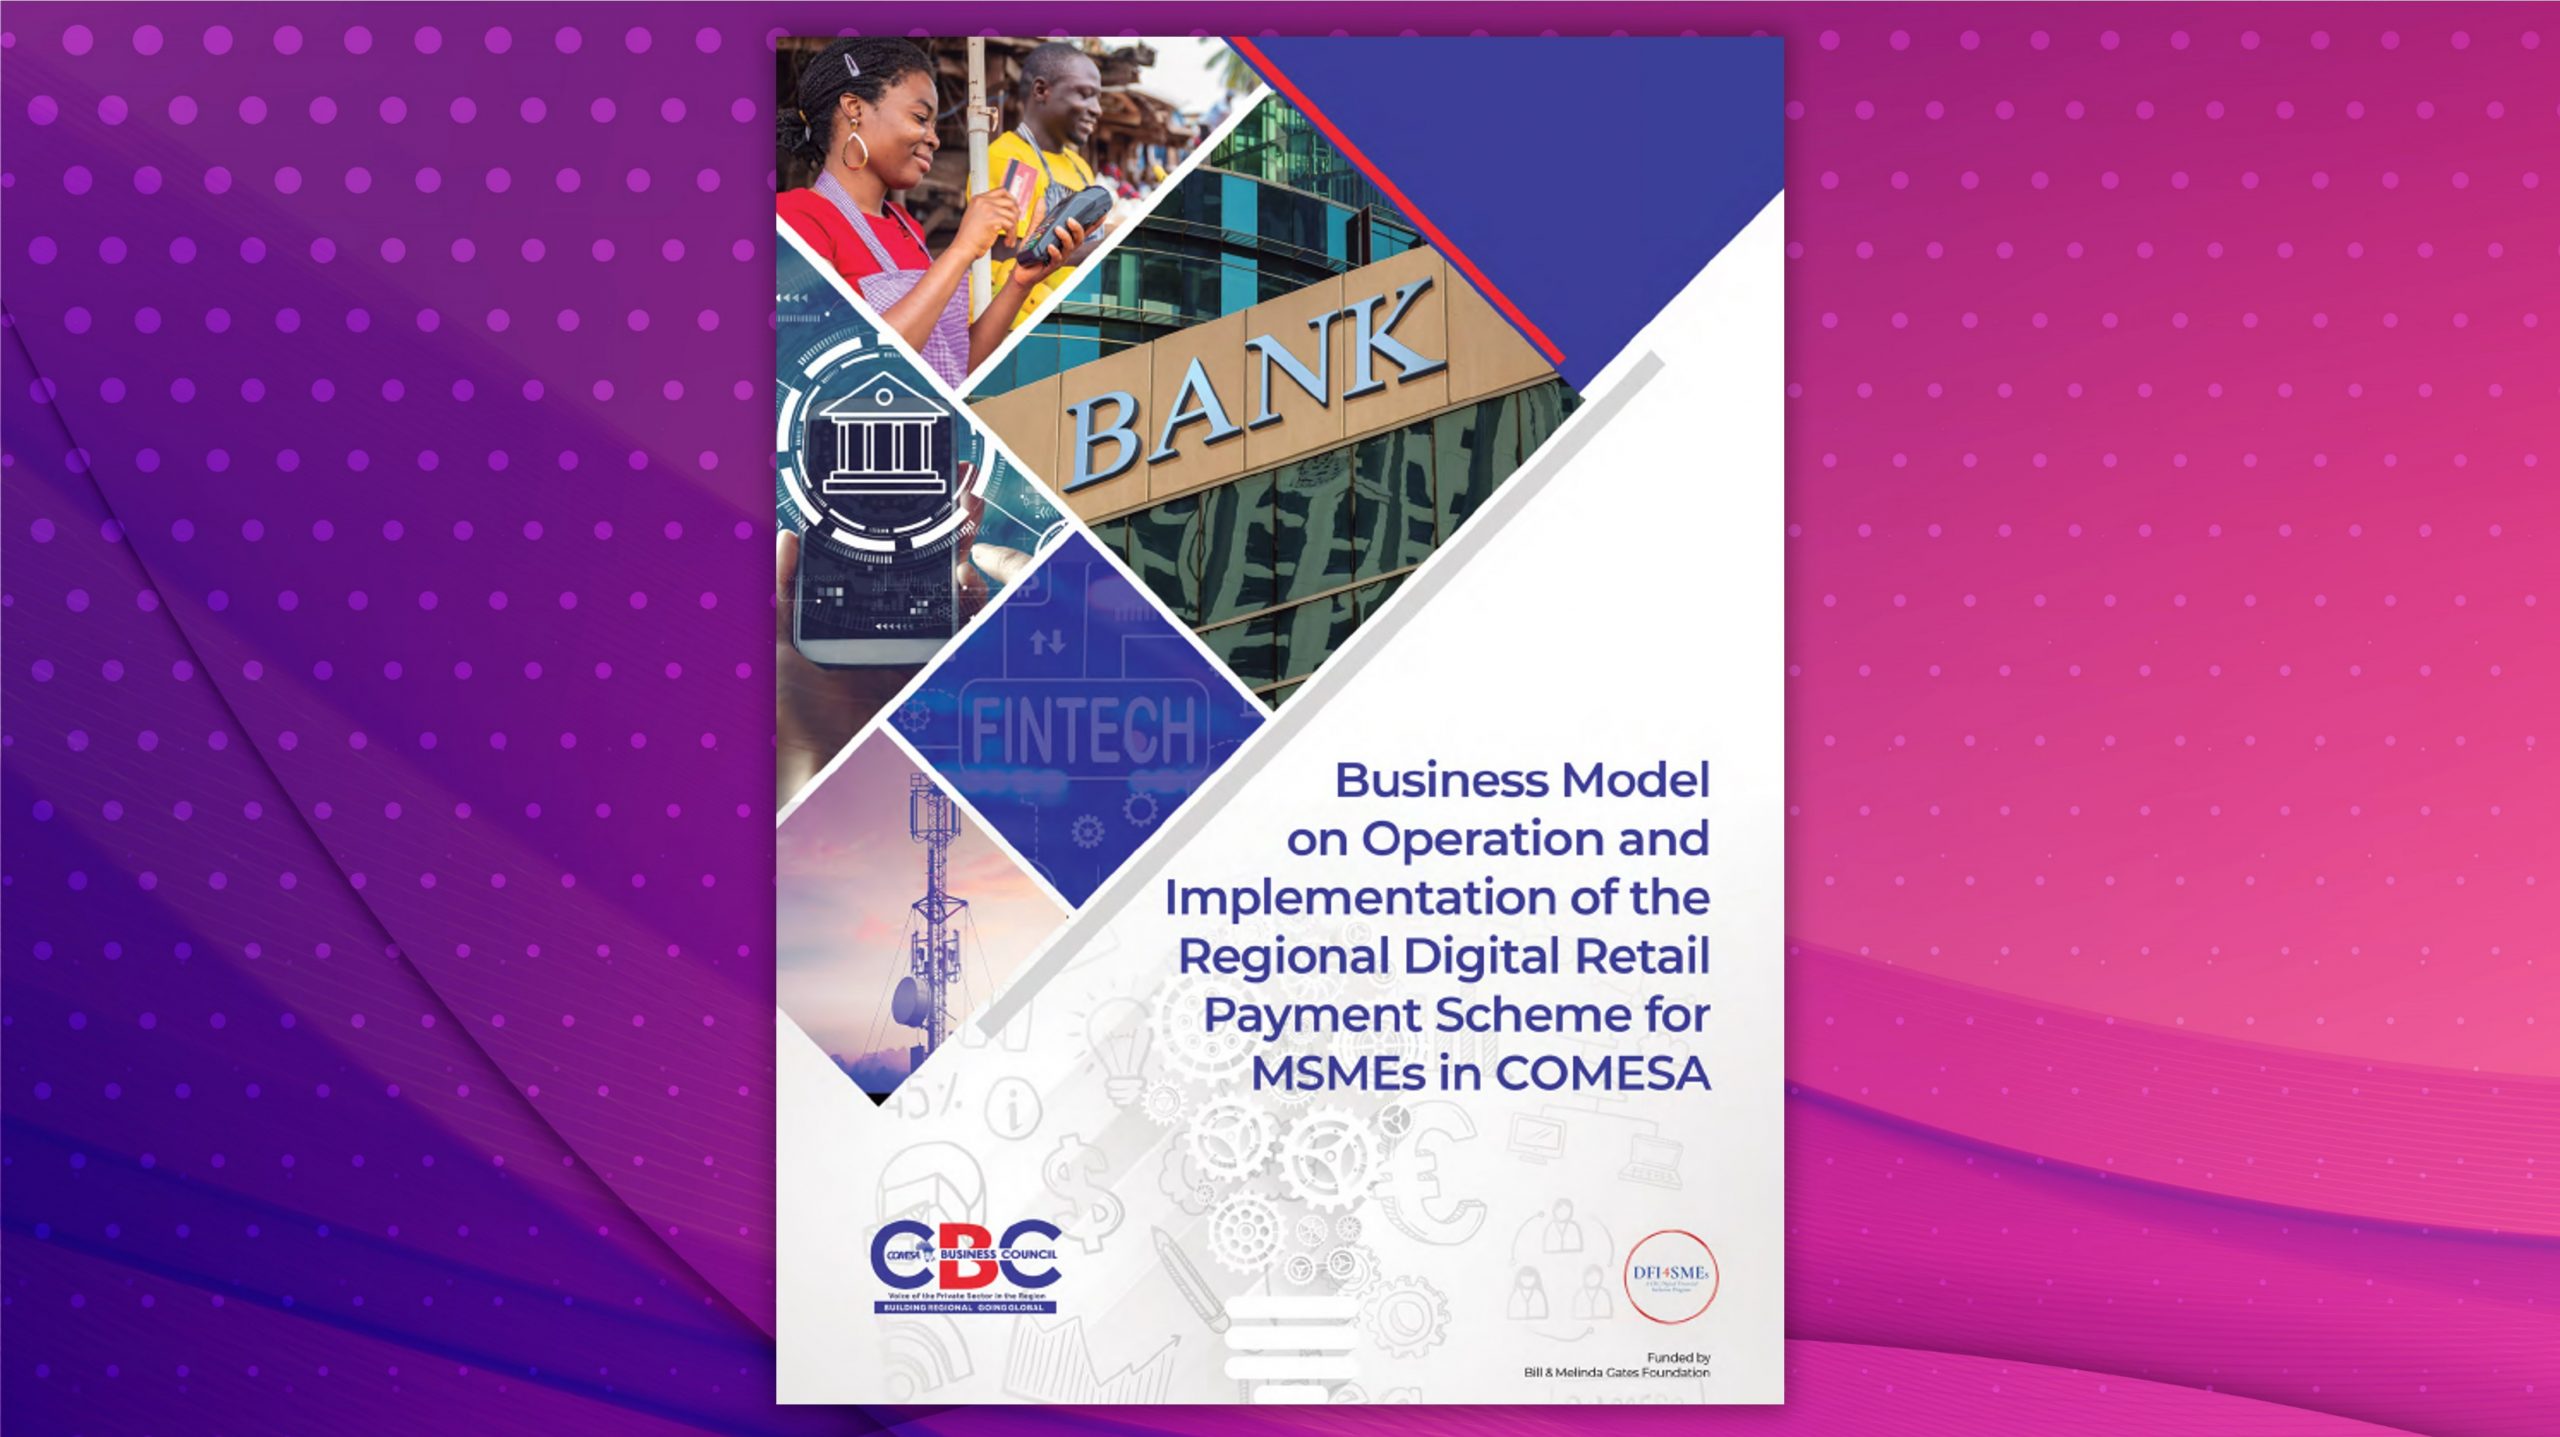 Business Model on Operations & Implementation of Digital Retail Payments Scheme - Jpg